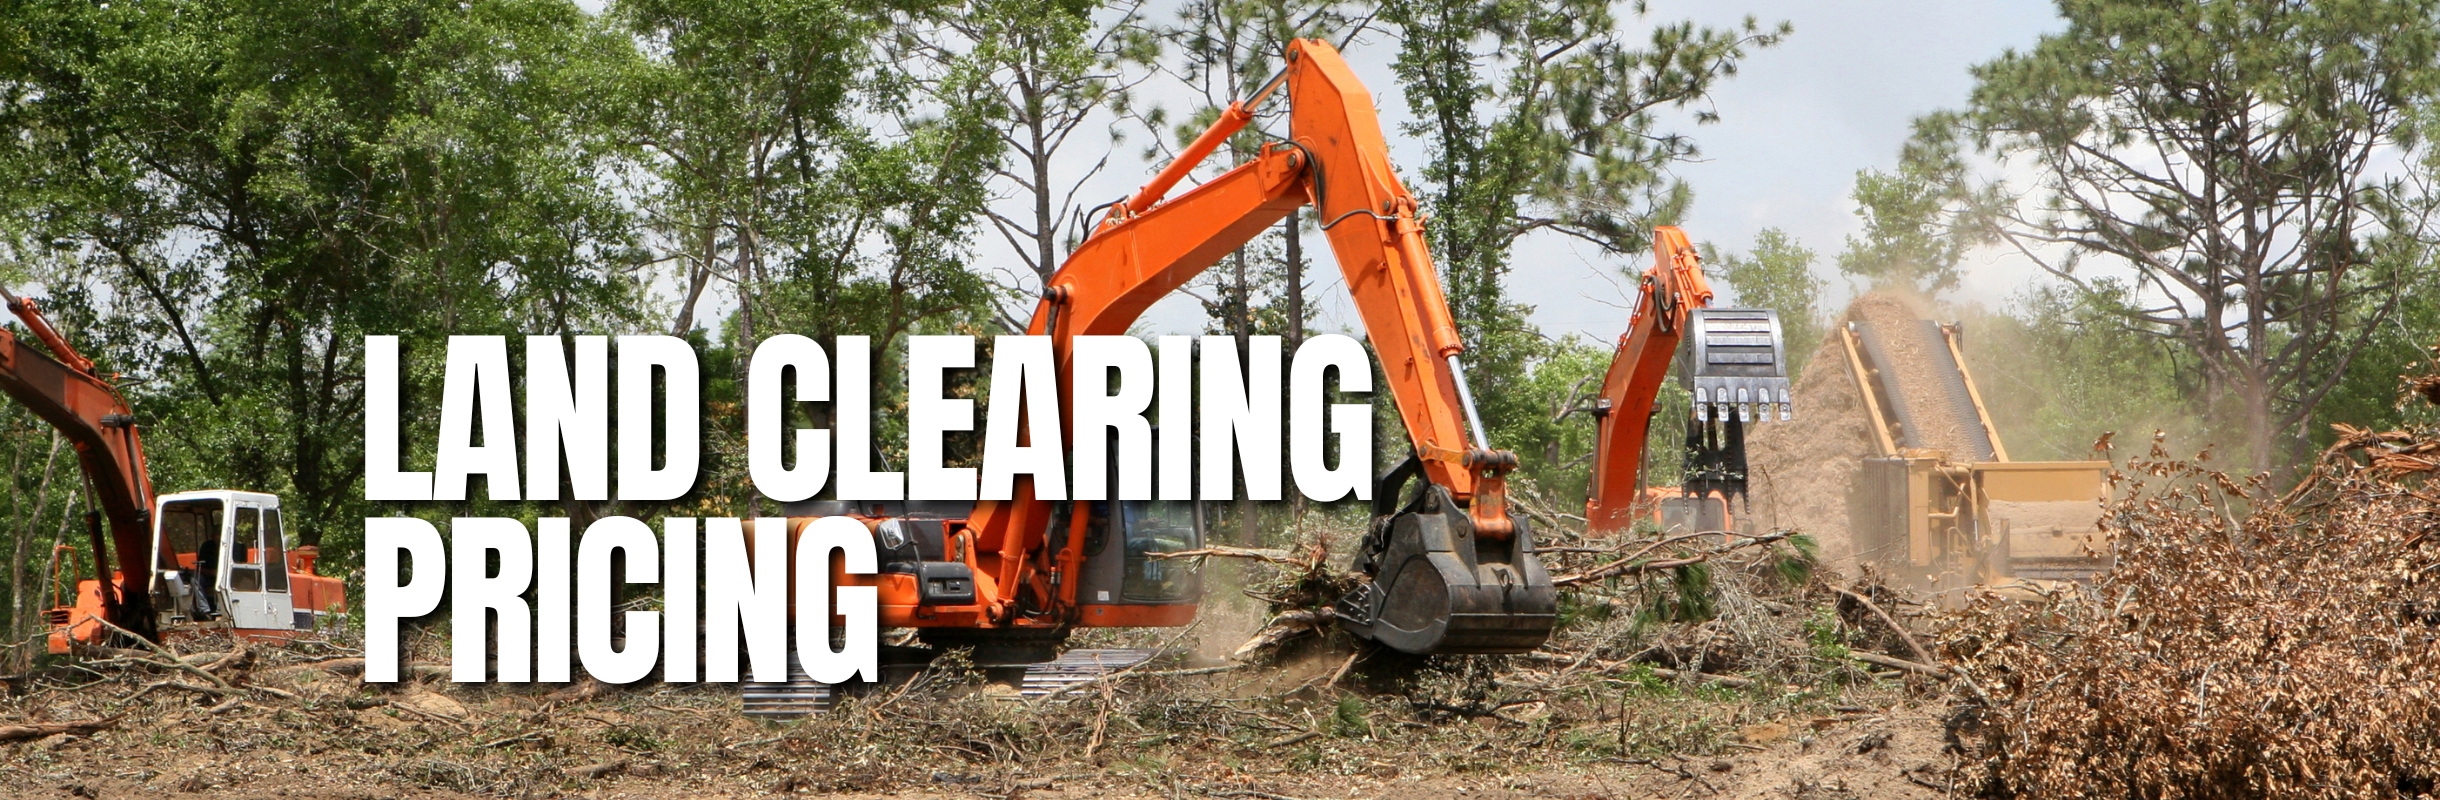 Land-Clearing-Pricing